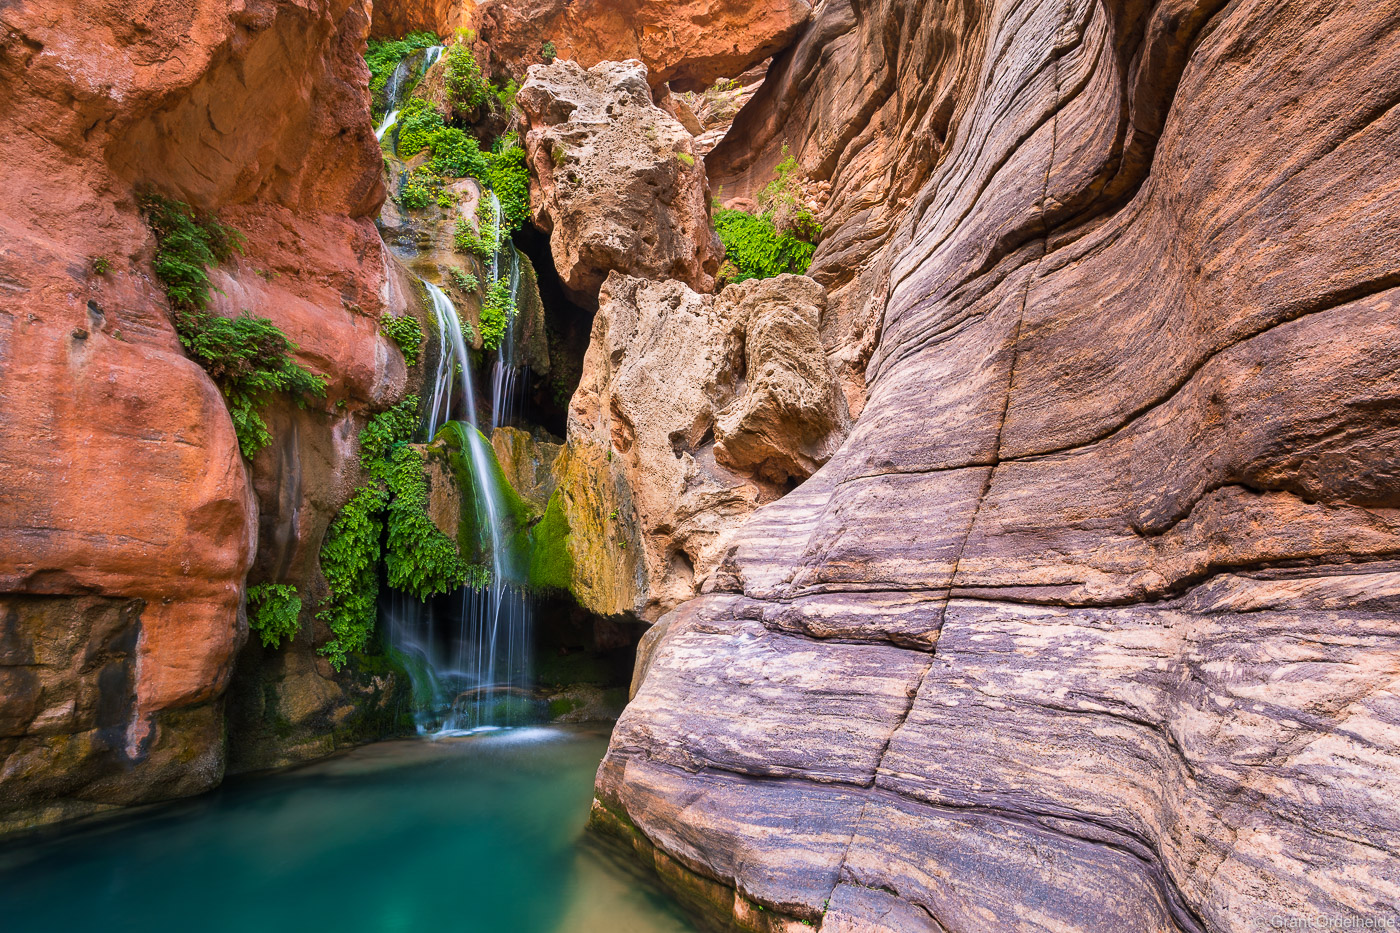 The waterfalls of Elves Chasm deep at the bottom of the Grand Canyon.